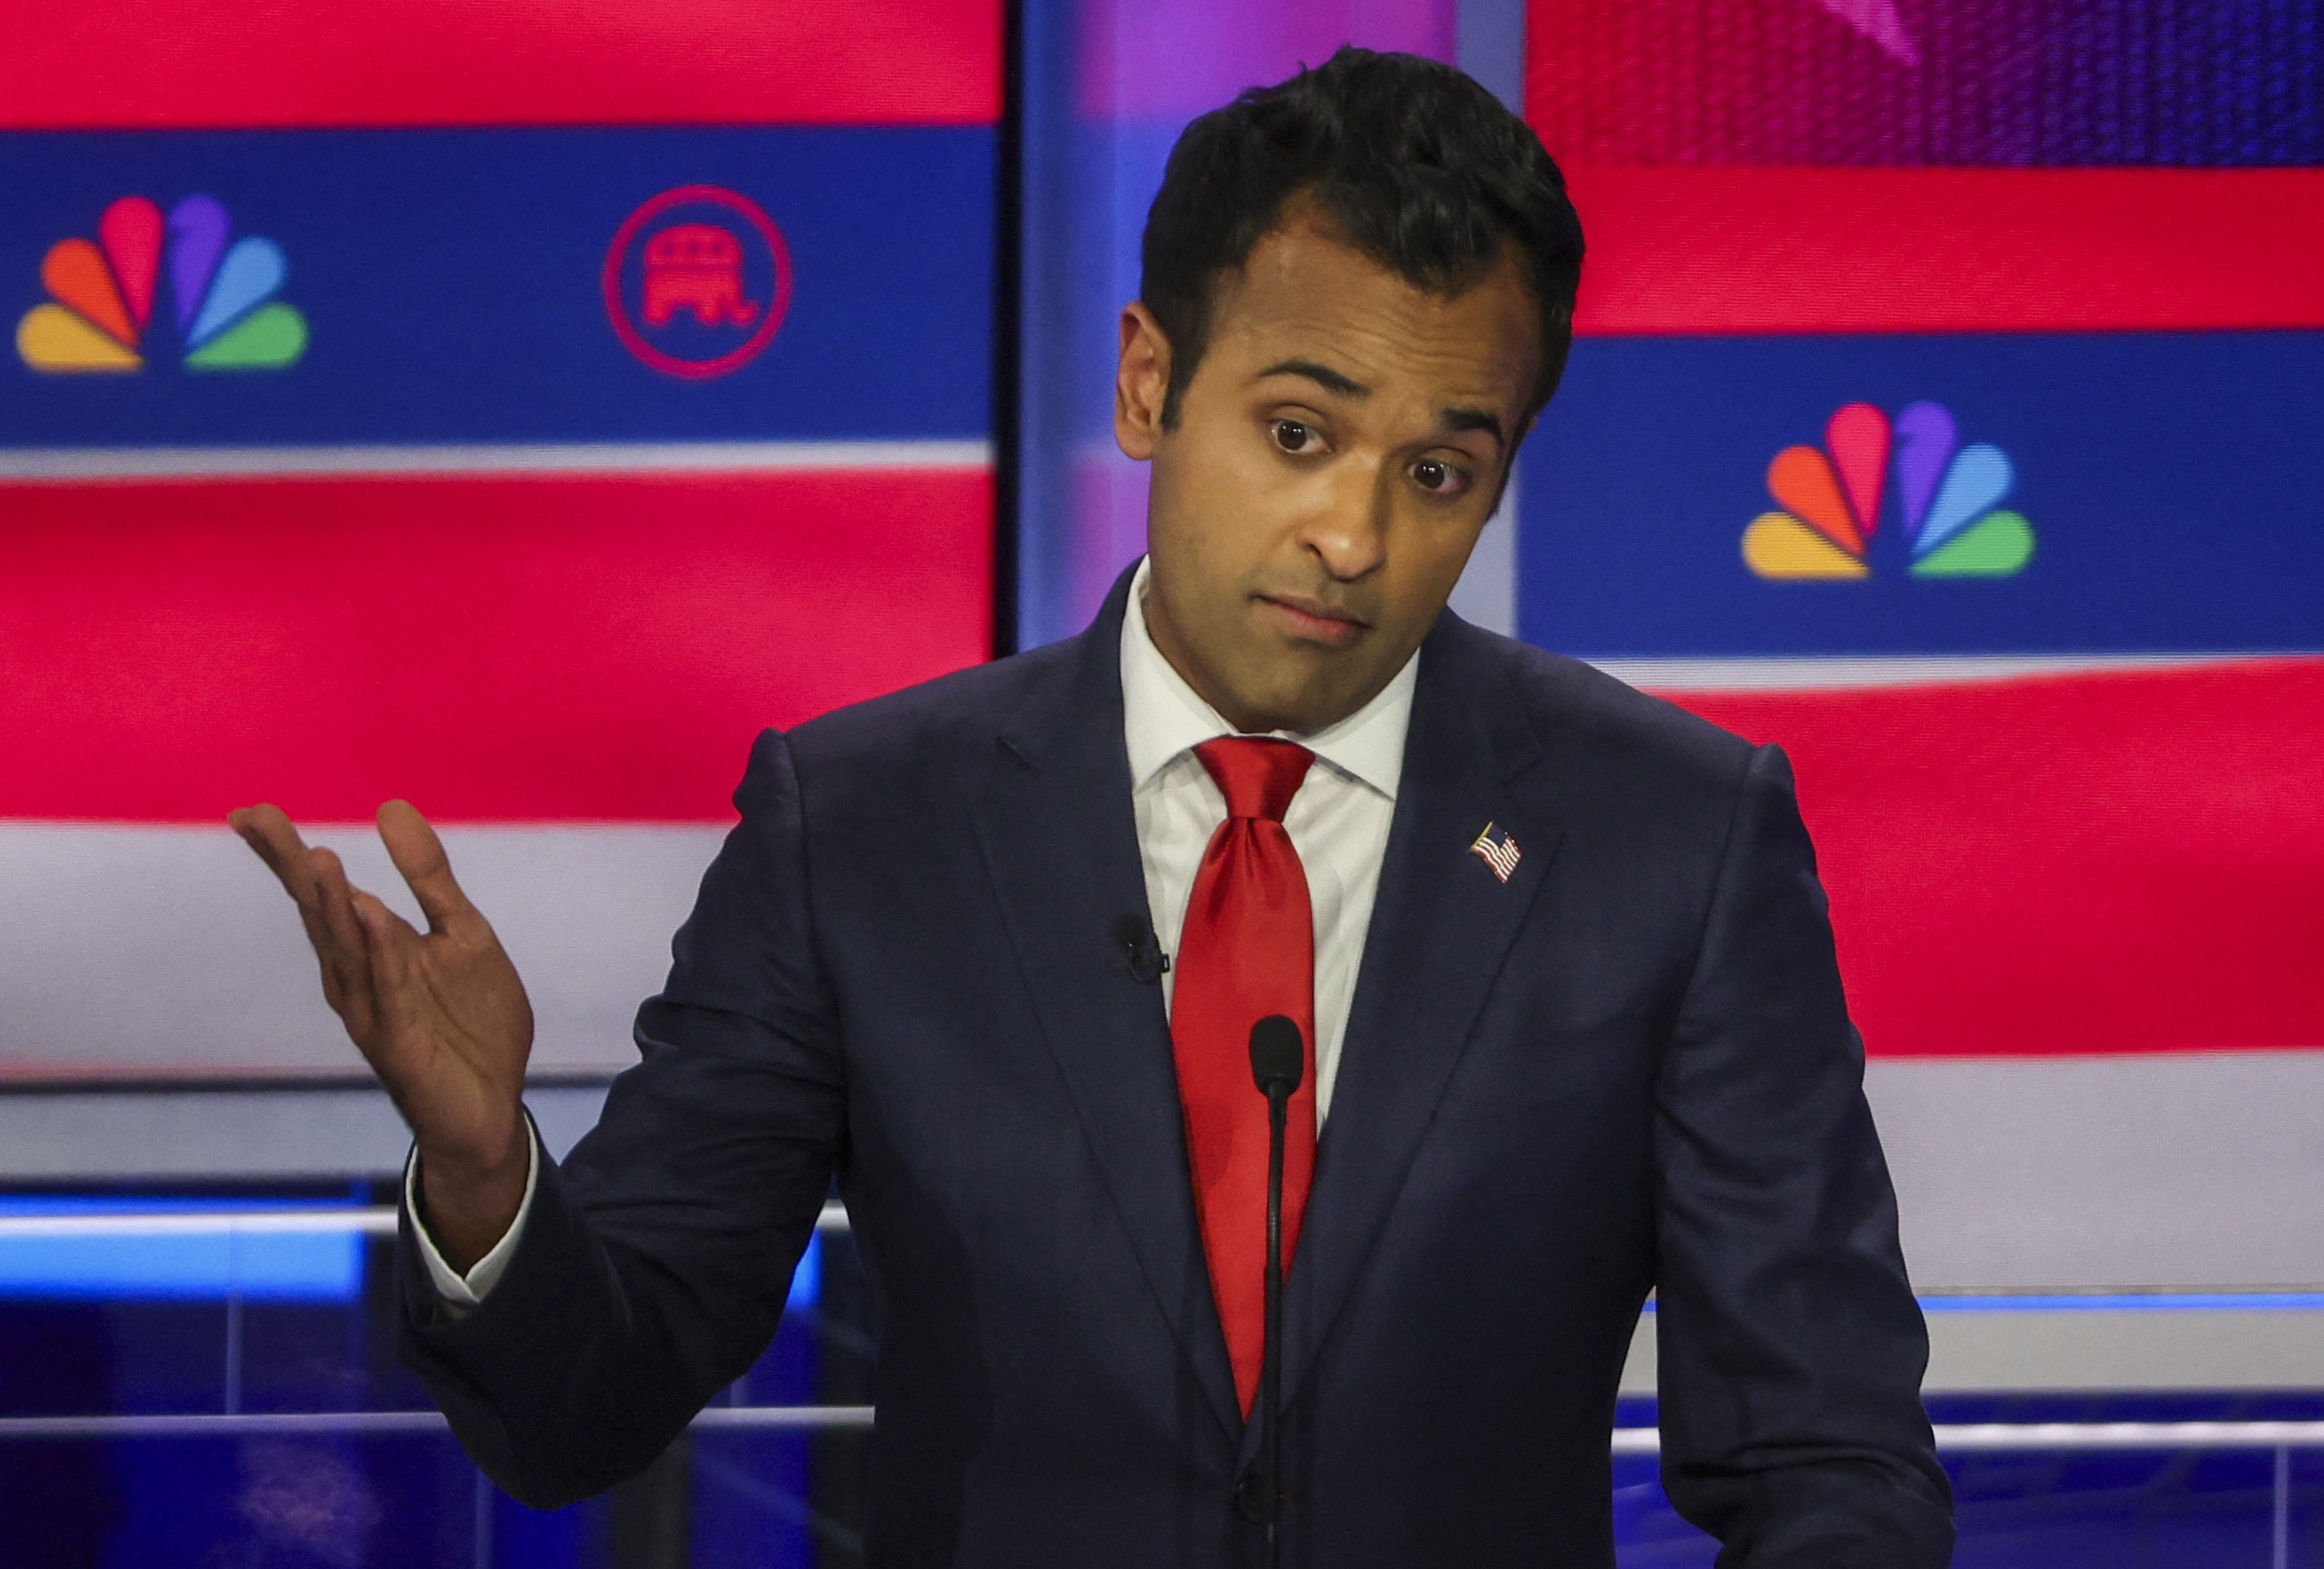 Former biotech executive Vivek Ramaswamy speaks at the third Republican candidates' U.S. presidential debate of the 2024 U.S. presidential campaign hosted by NBC News at the Adrienne Arsht Center for the Performing Arts in Miami, Florida